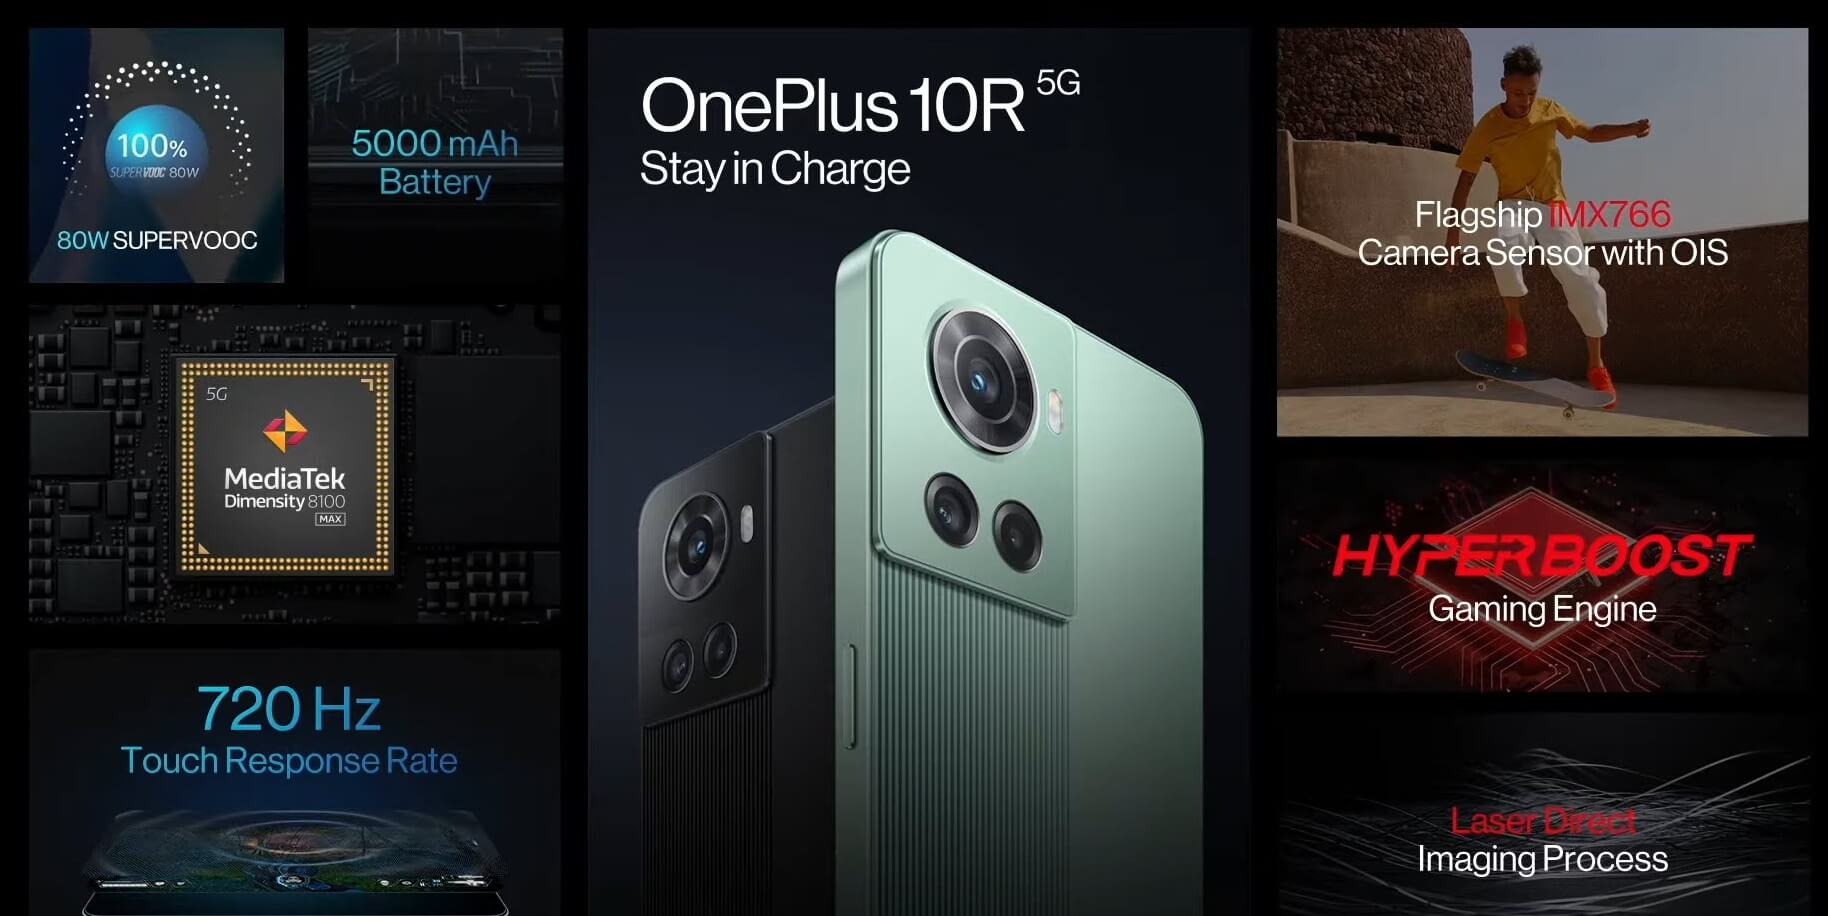 OnePlus 10R features